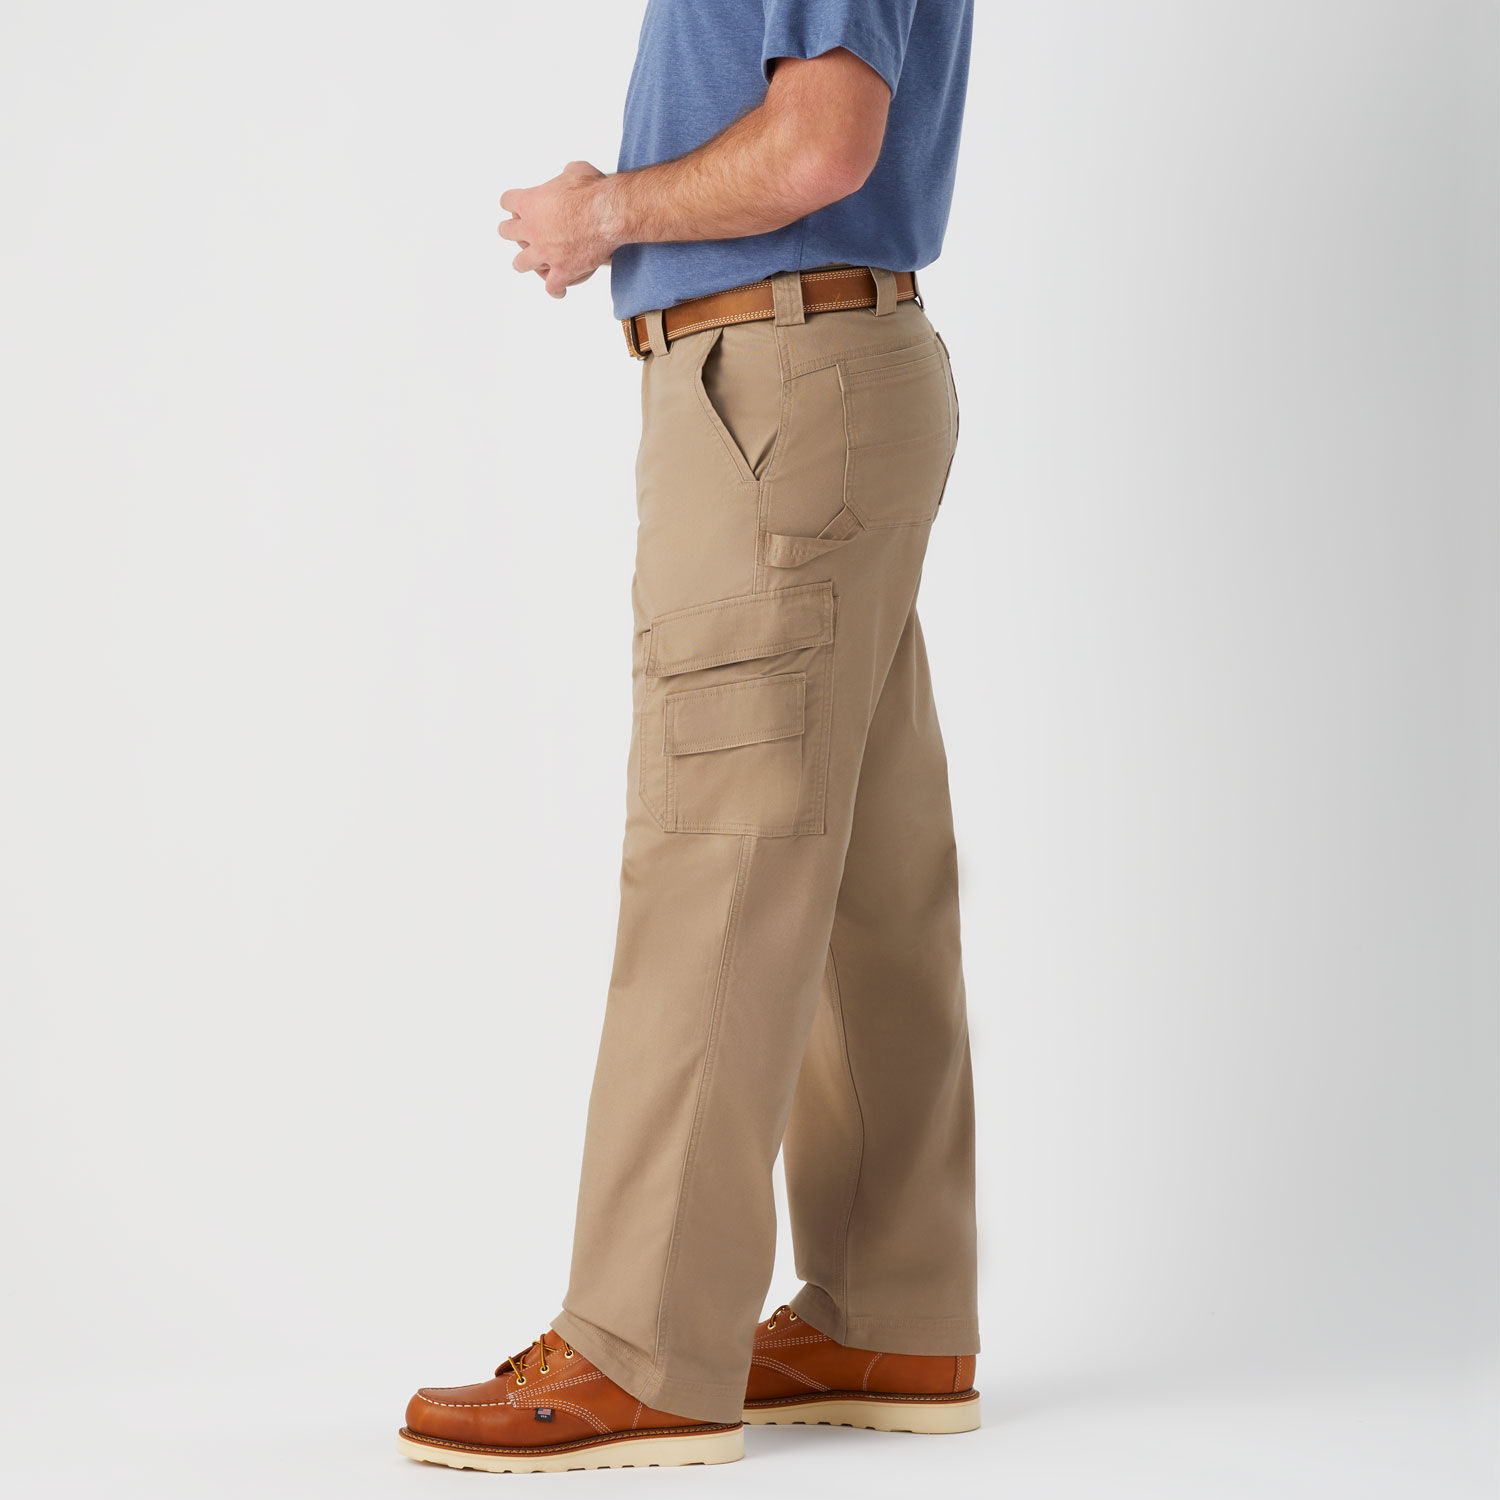 Milwaukee Men's 34 in. x 32 in. Khaki and Gray Cotton/Polyester/Spandex  Flex Work Pants with 6-Pockets (2-Pack) 701K-3432-701G-3432 - The Home Depot